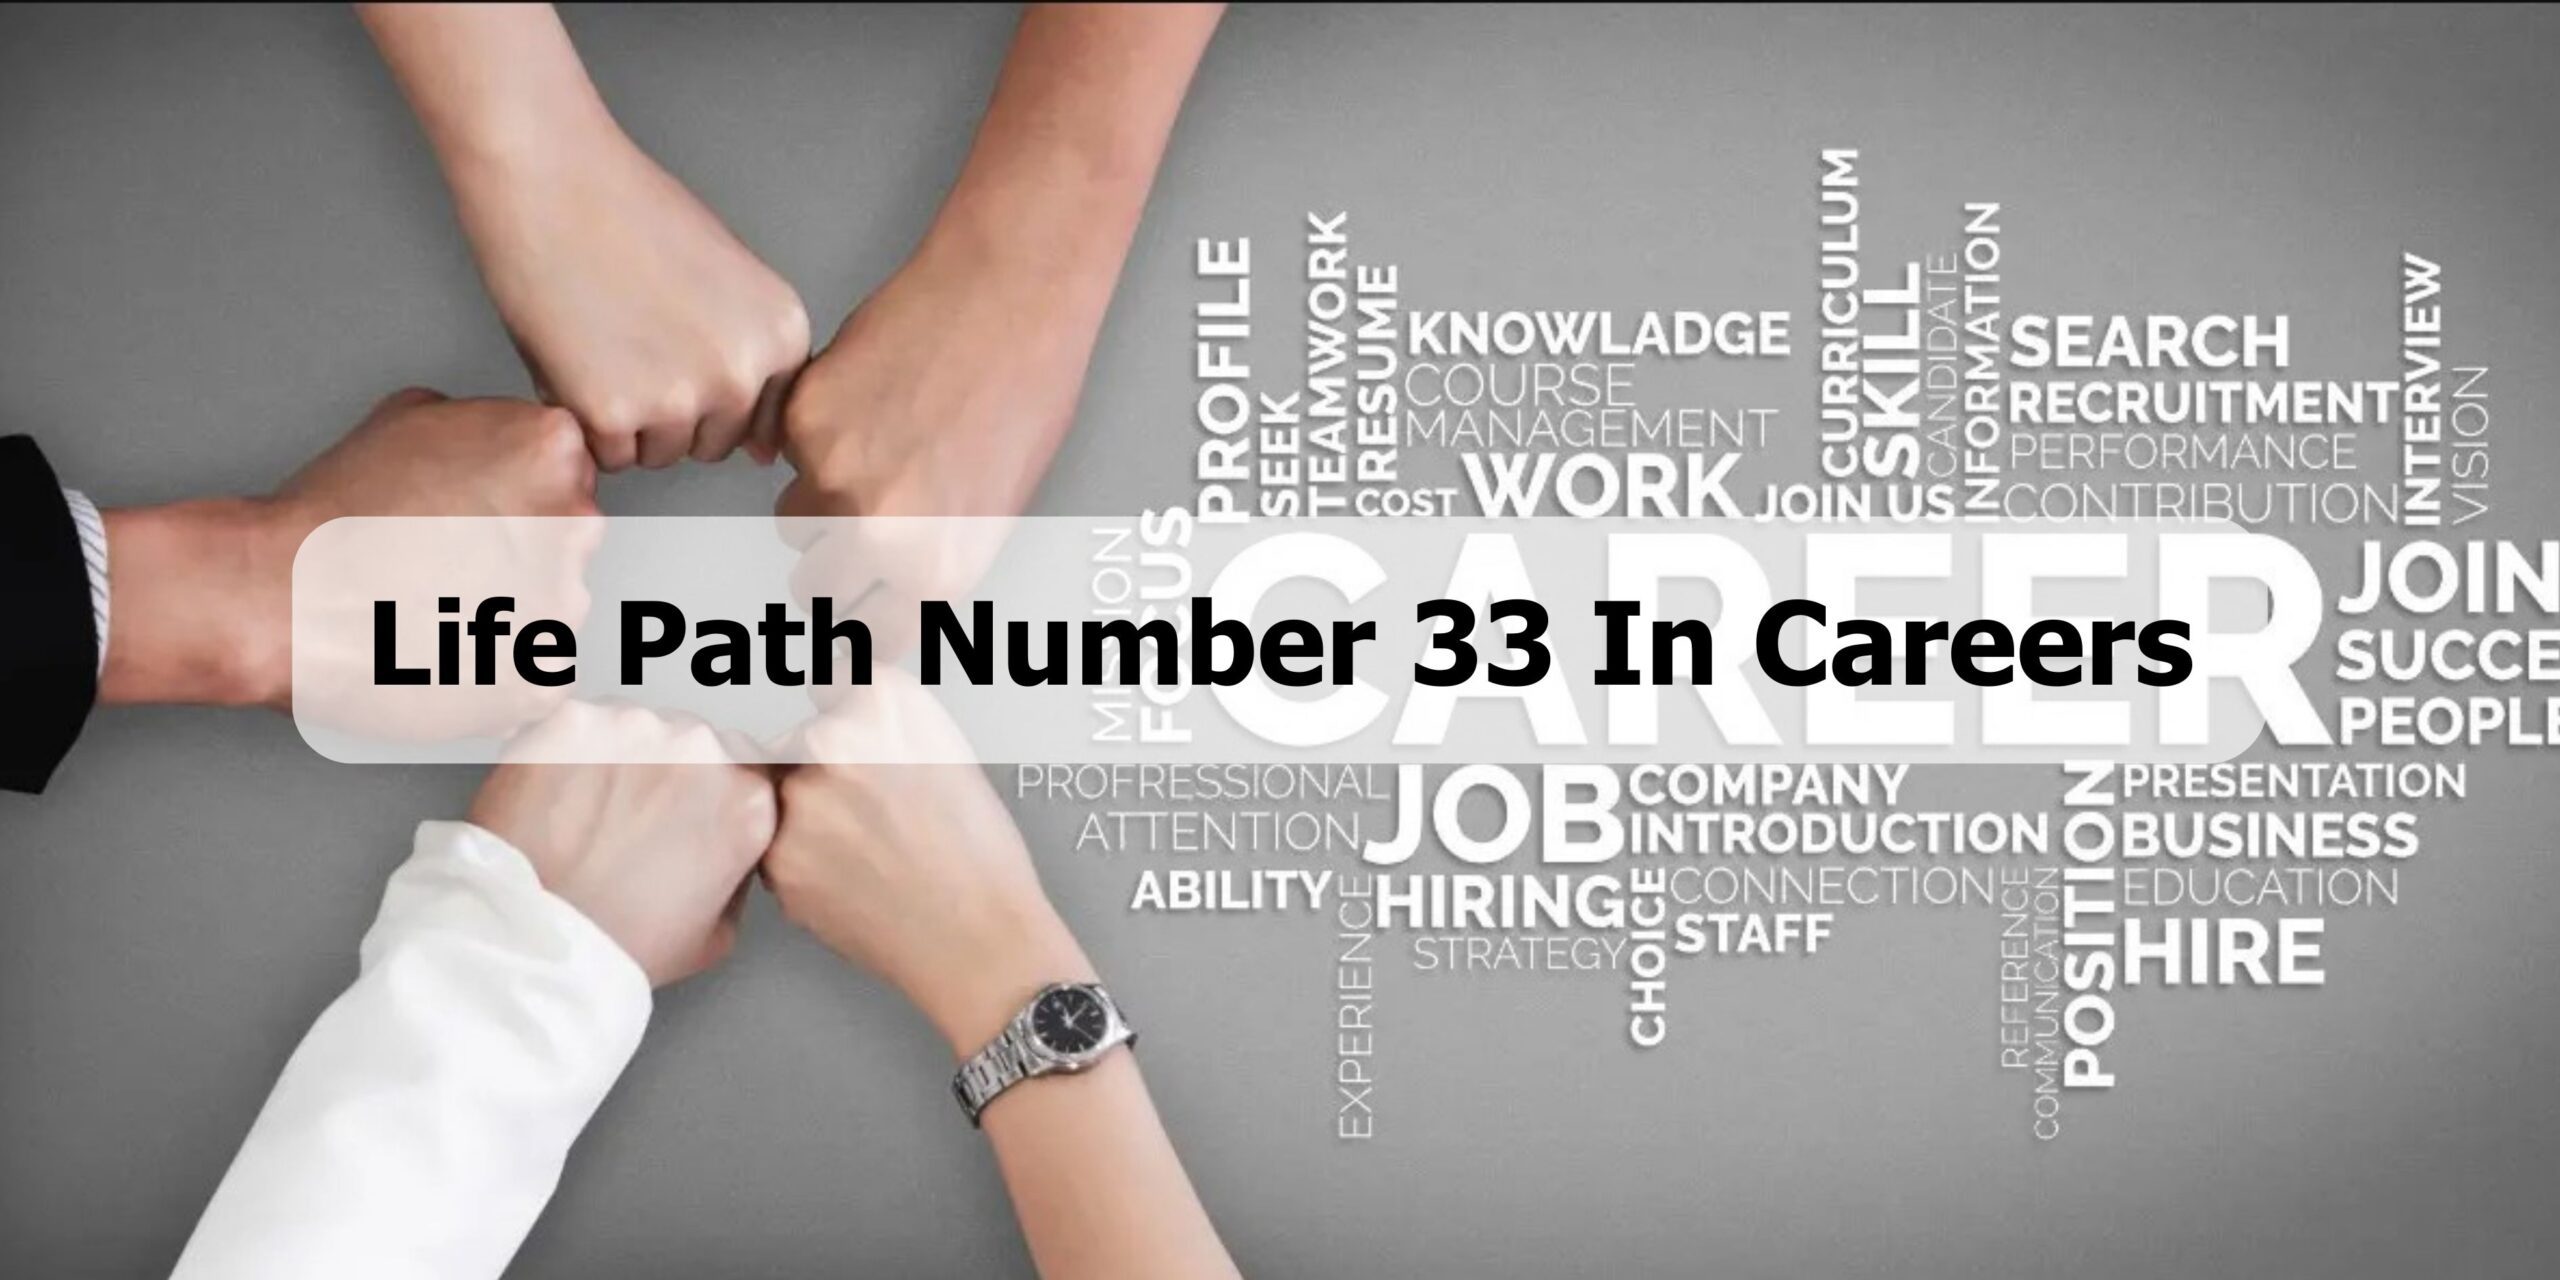 Life Path Number 33 in Careers